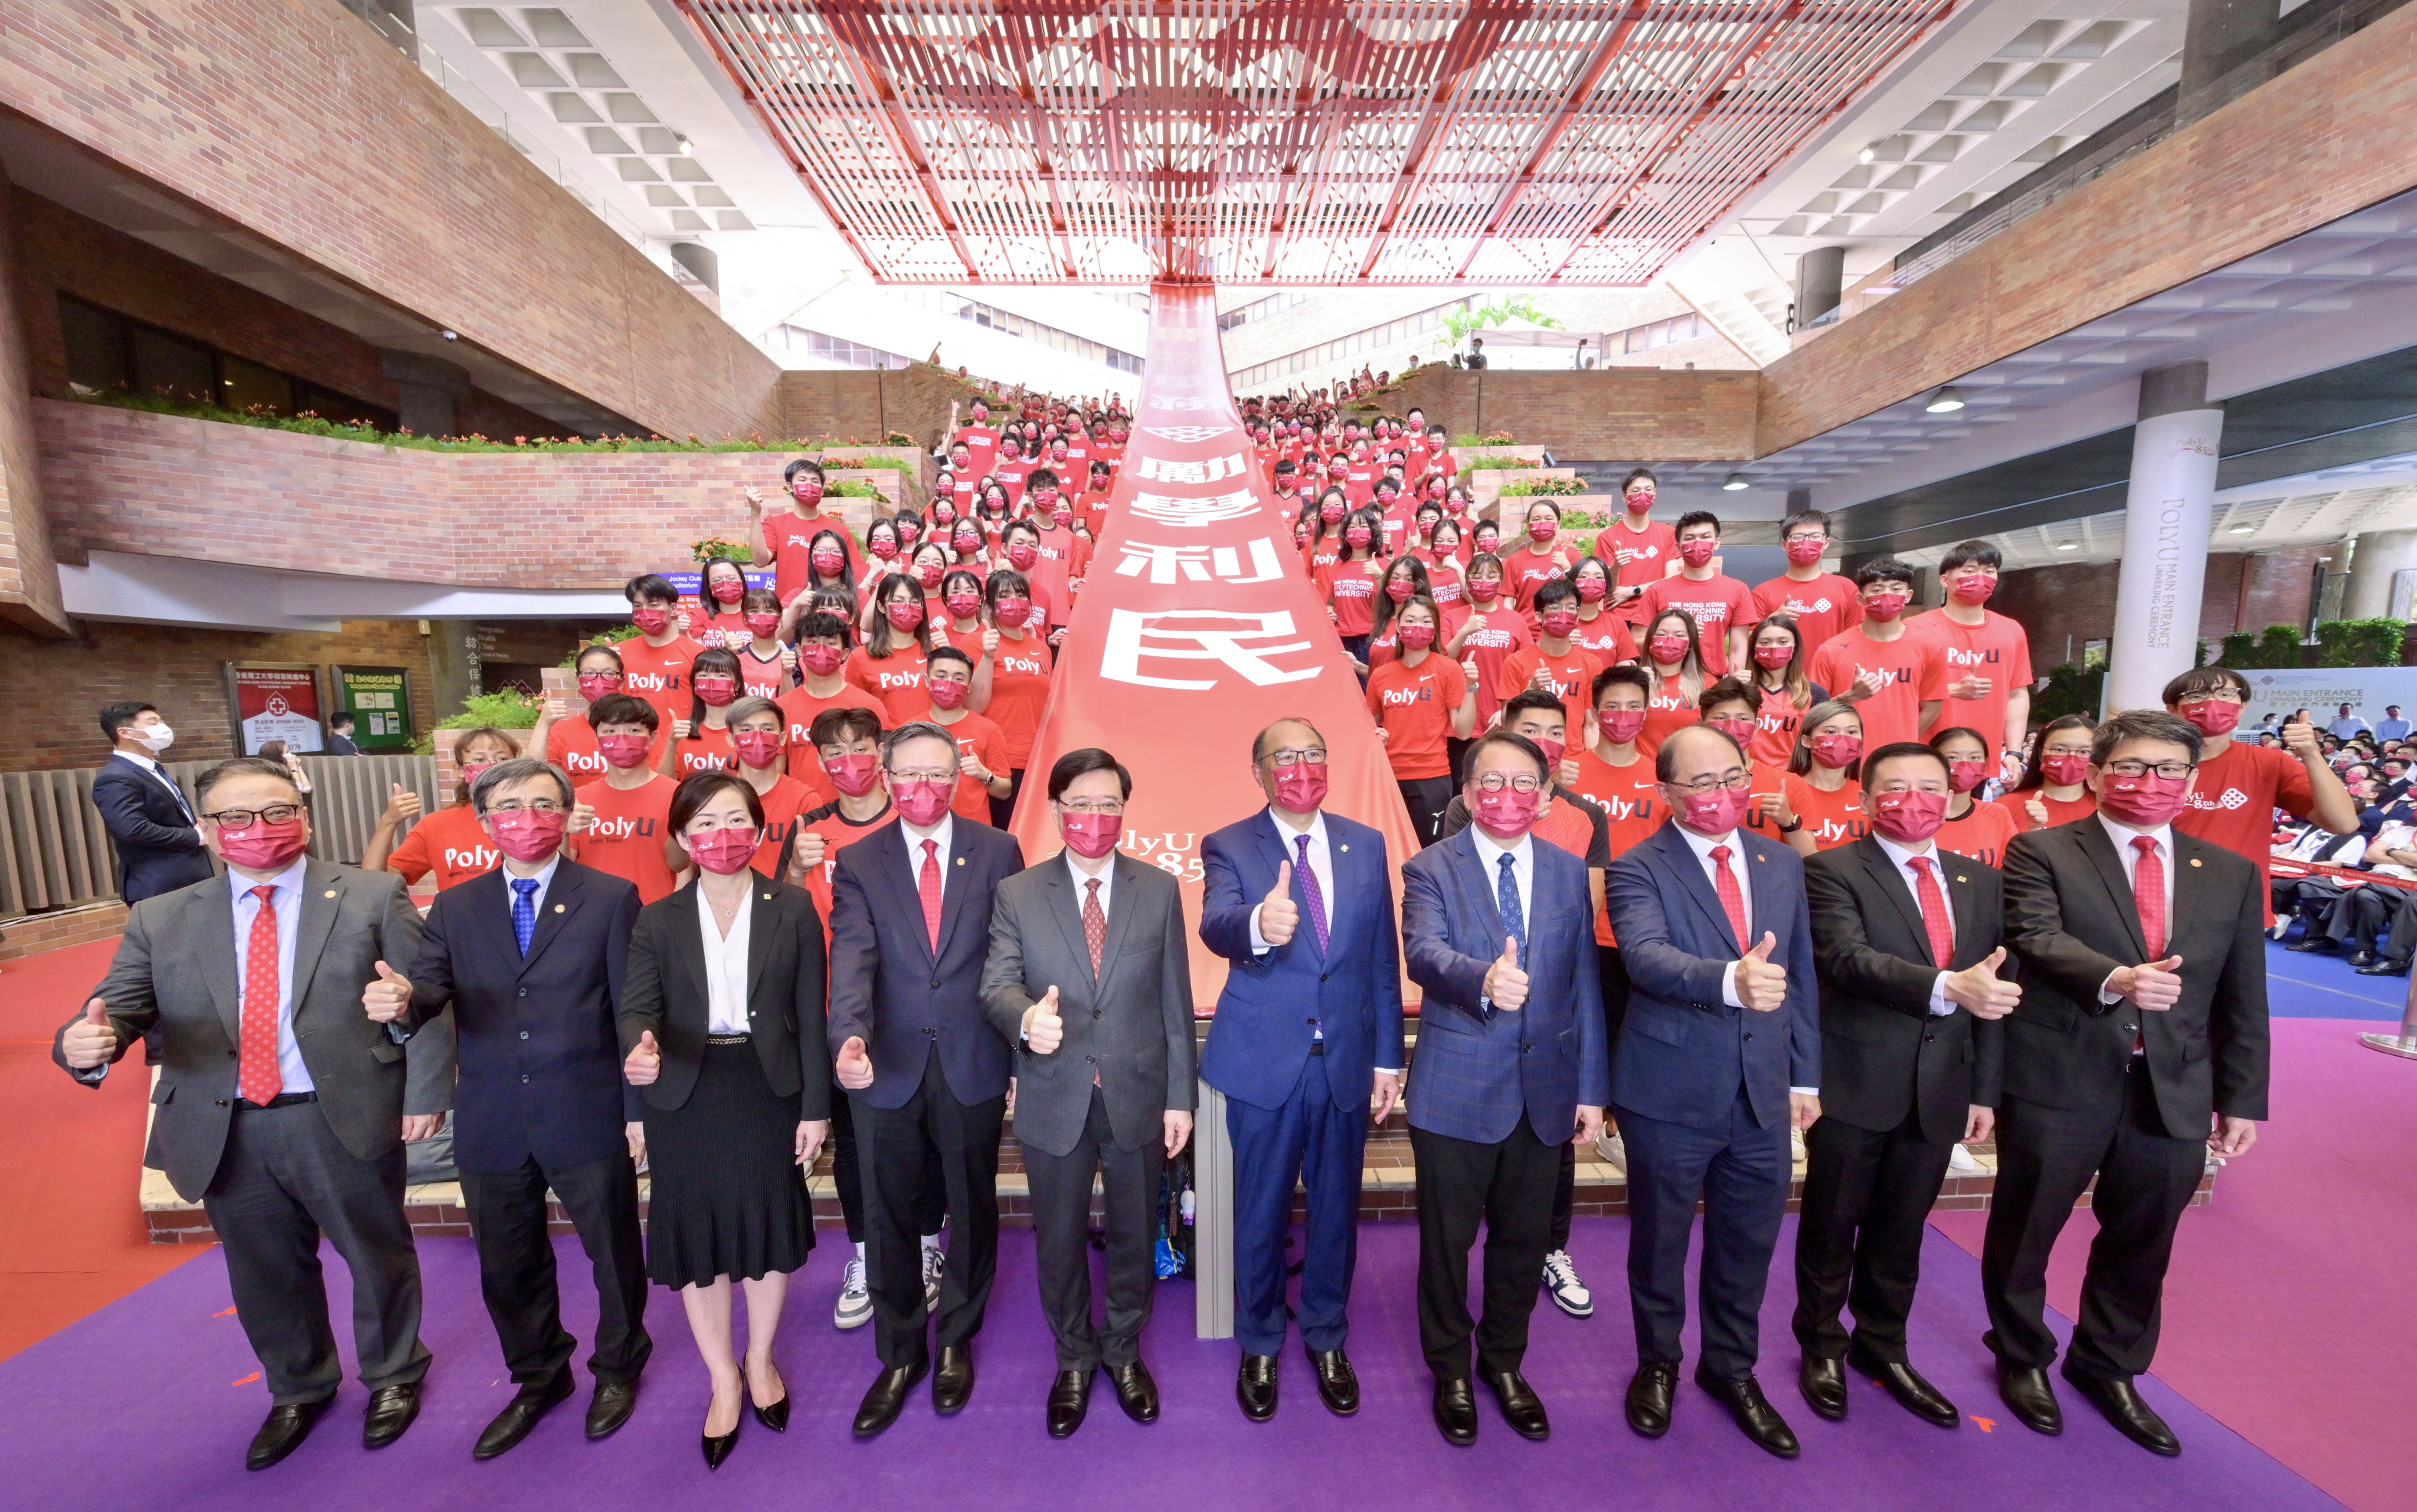 John Lee with officials and university representatives at the opening ceremony of the new PolyU entrance. Photo: Handout